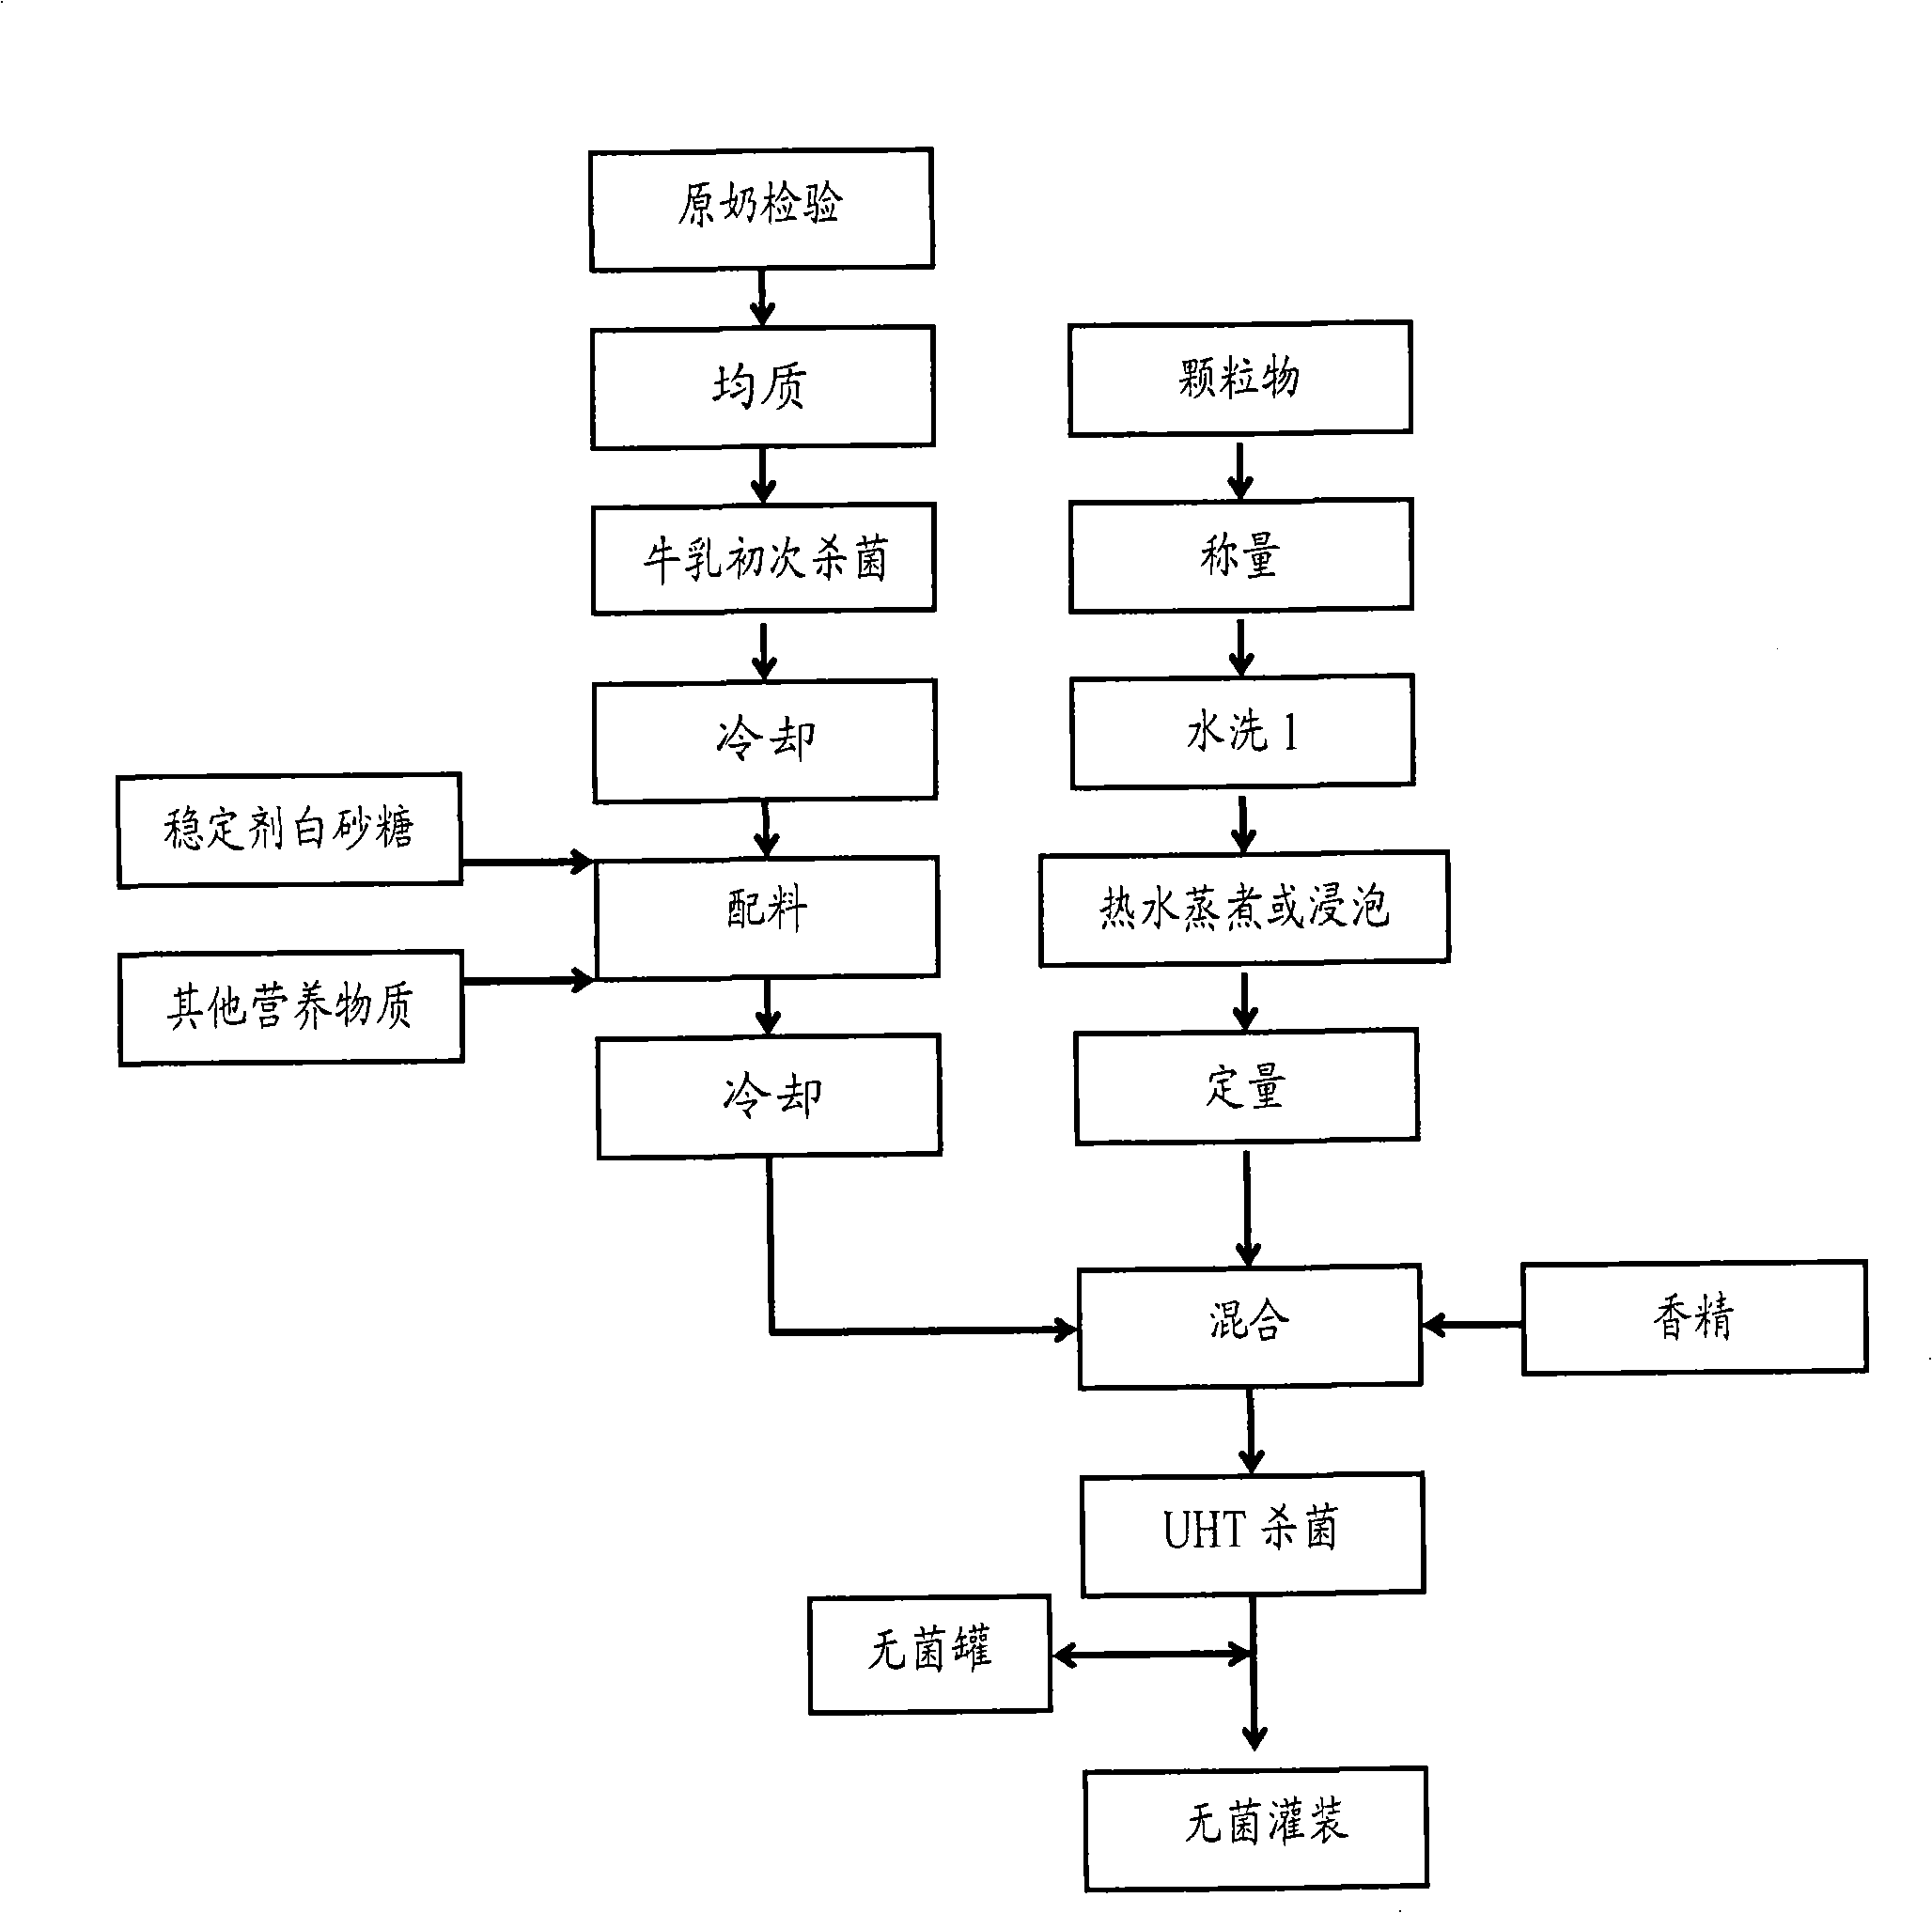 Method for producing milk product